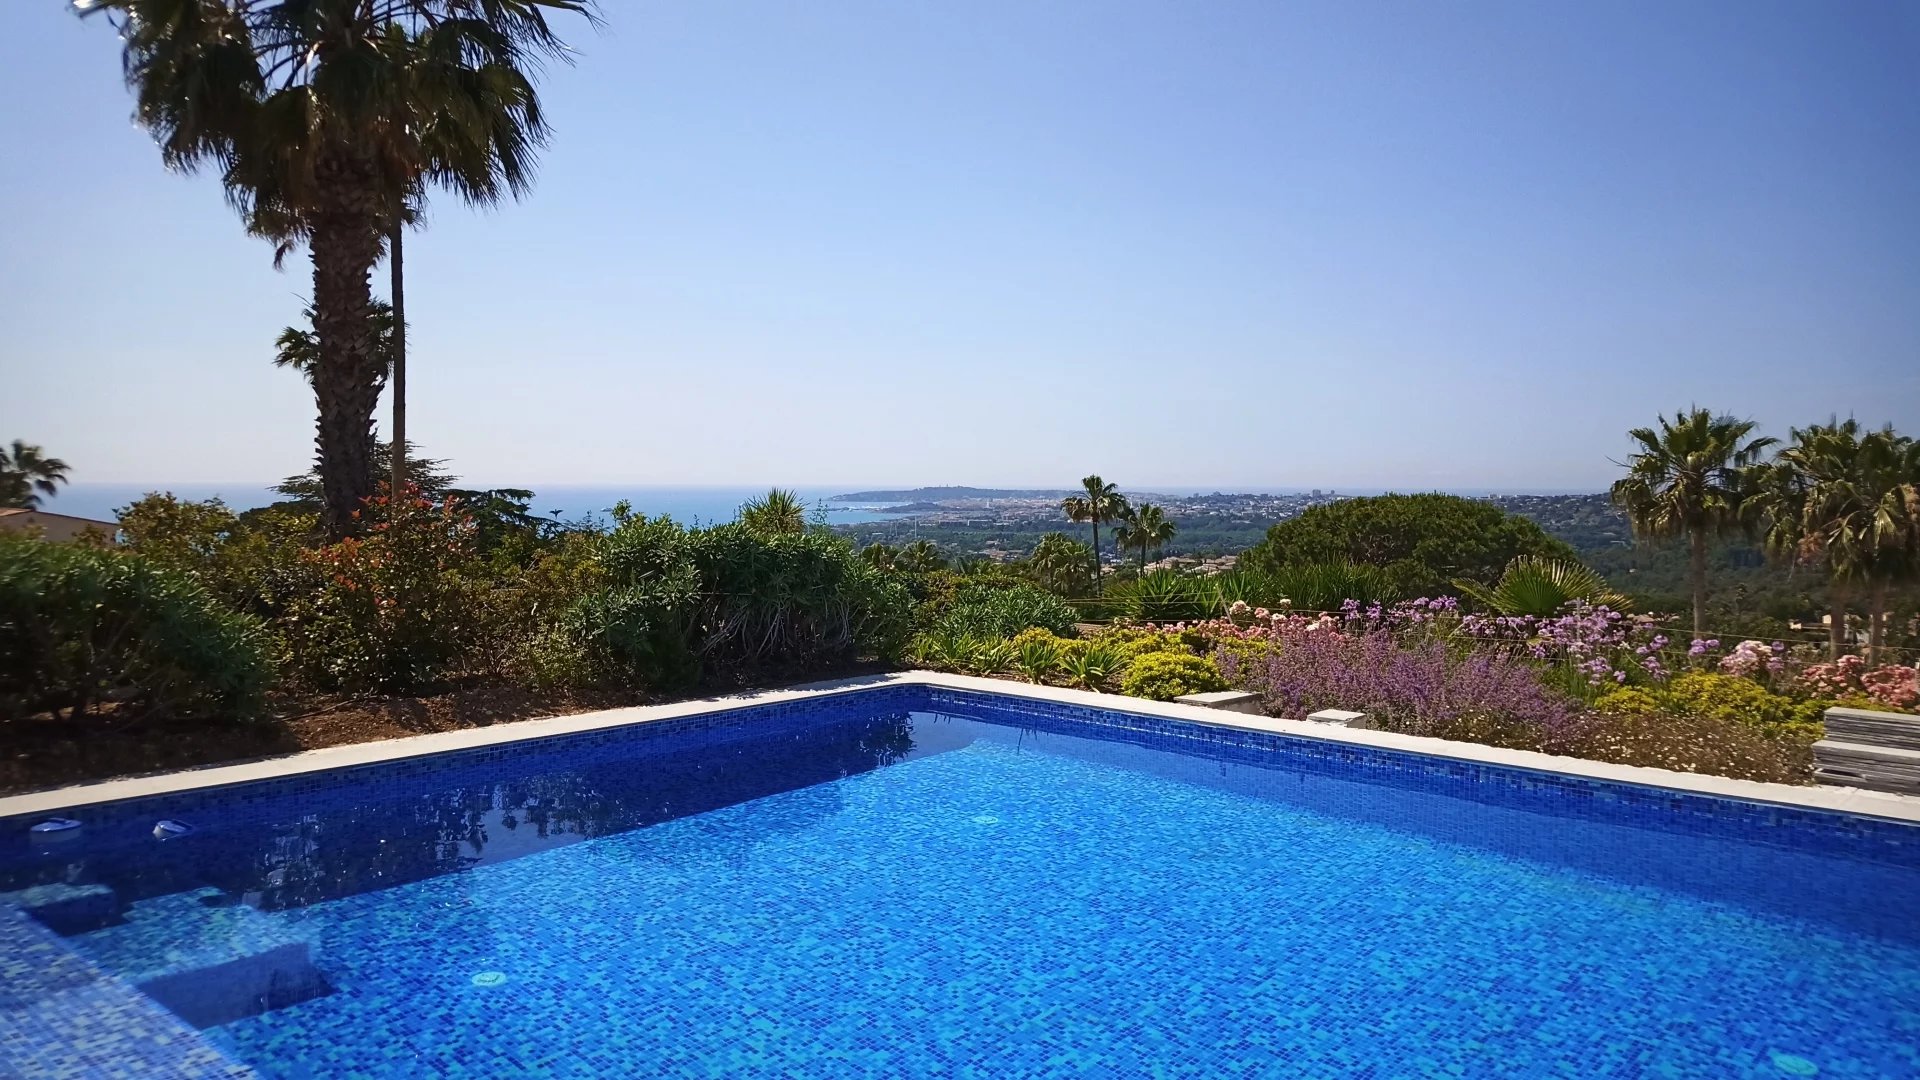 Exceptional villa in high security domain with breathtaking sea views